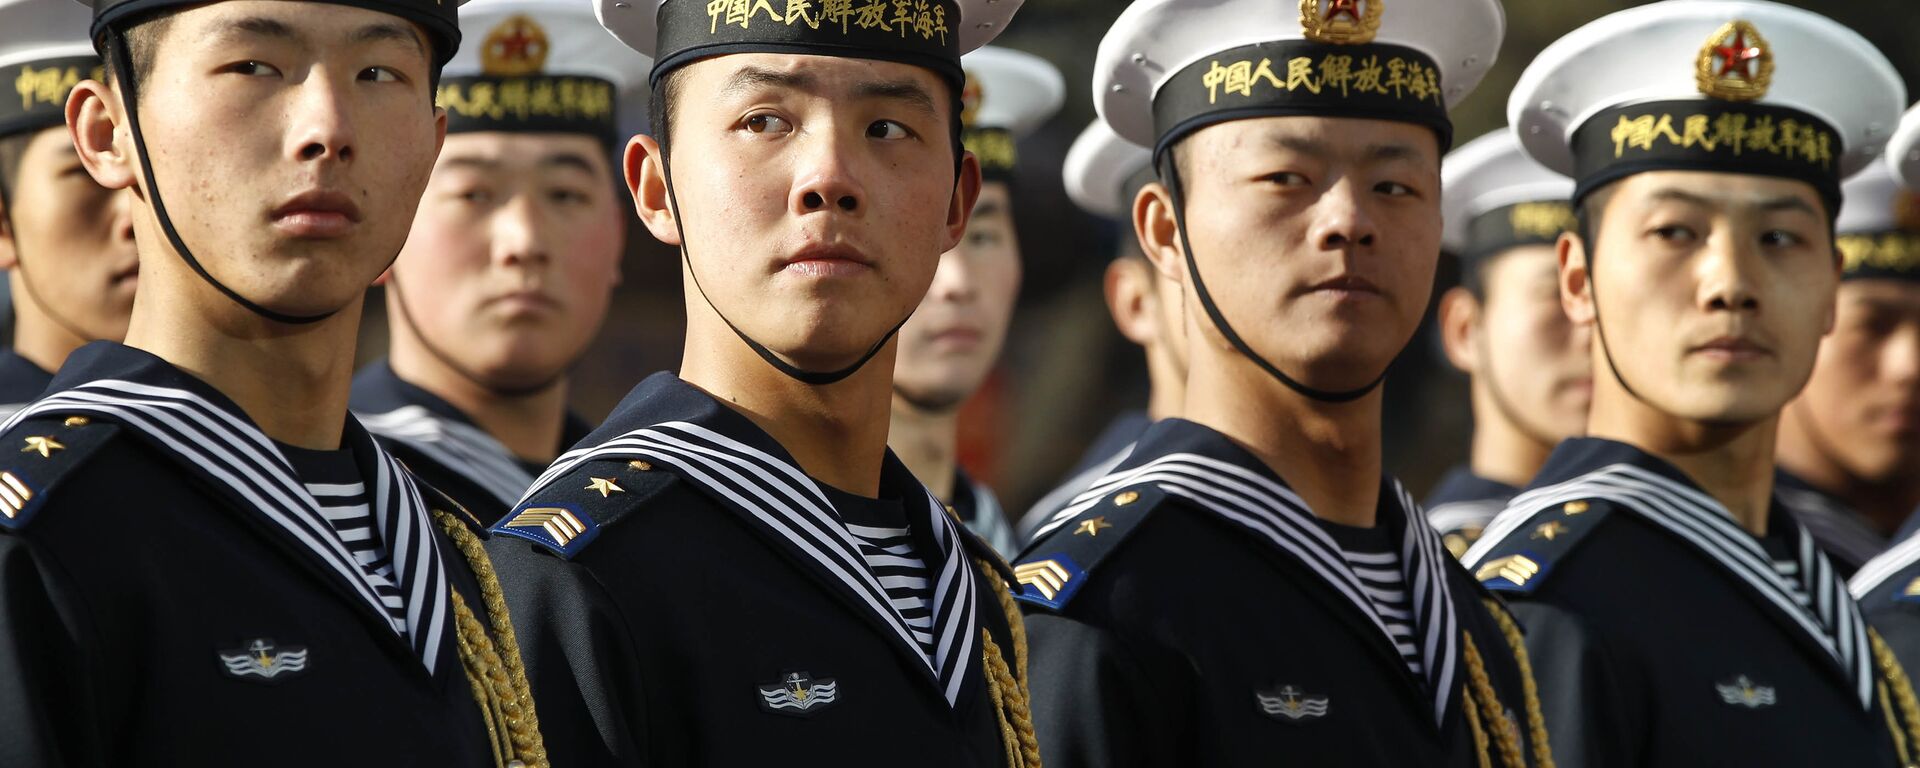 Members of a Chinese Navy honor guard wait for US officials during welcoming ceremony. File photo. - Sputnik International, 1920, 28.07.2022